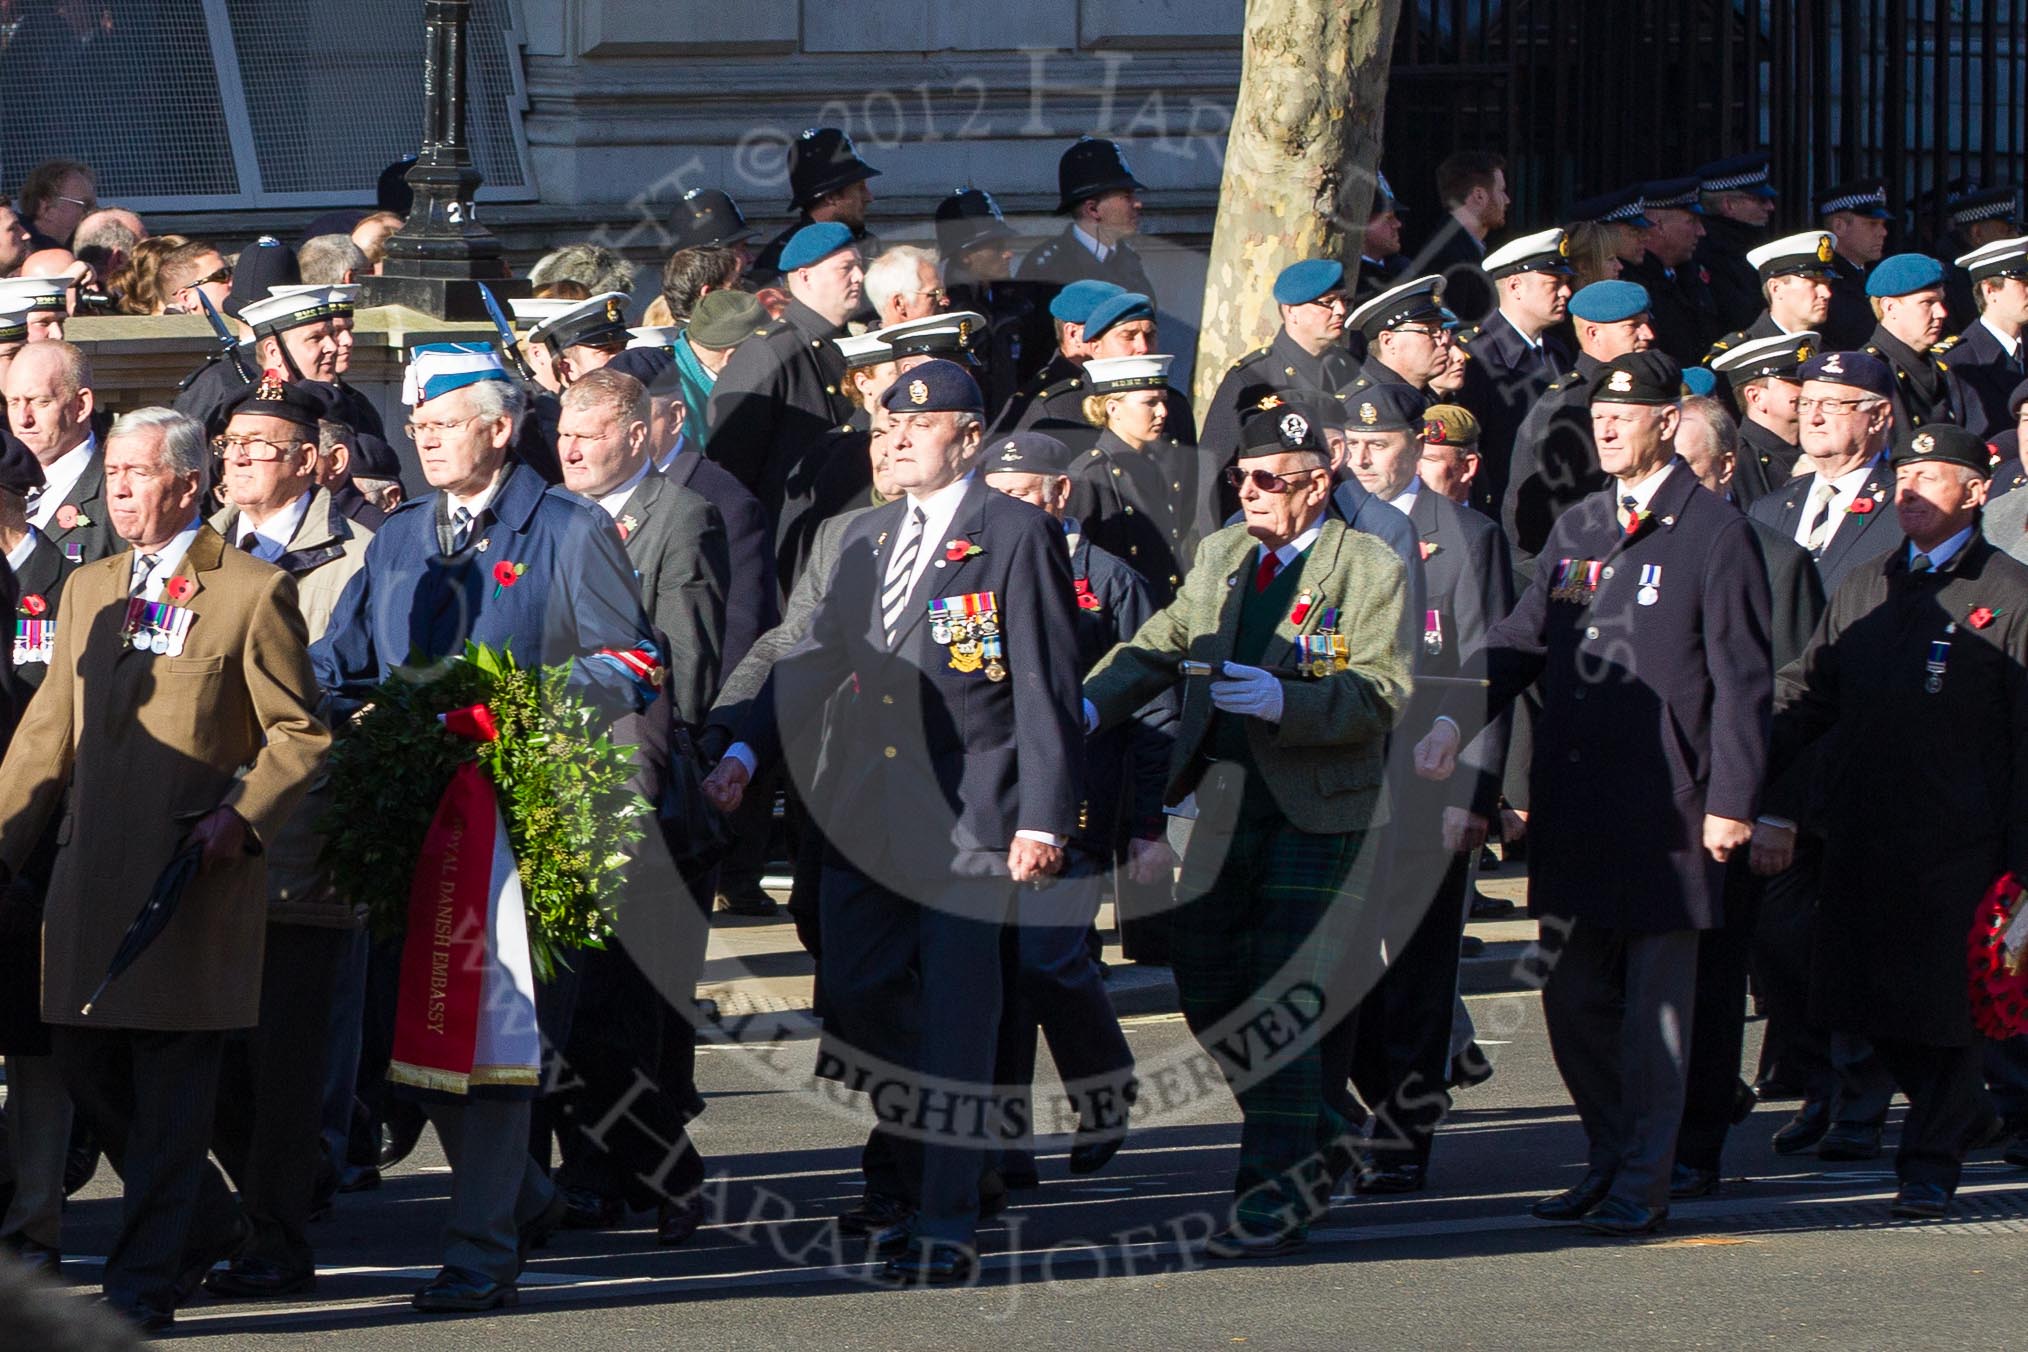 Remembrance Sunday 2012 Cenotaph March Past: Group A1/2/3 - Princess of Wales's Royal Regiment/Prince of Wales's Leinster Regiment (Royal Canadians) Regimental Association/Royal East Kent Regiment (The Buffs) Past & Present Association..
Whitehall, Cenotaph,
London SW1,

United Kingdom,
on 11 November 2012 at 11:48, image #553